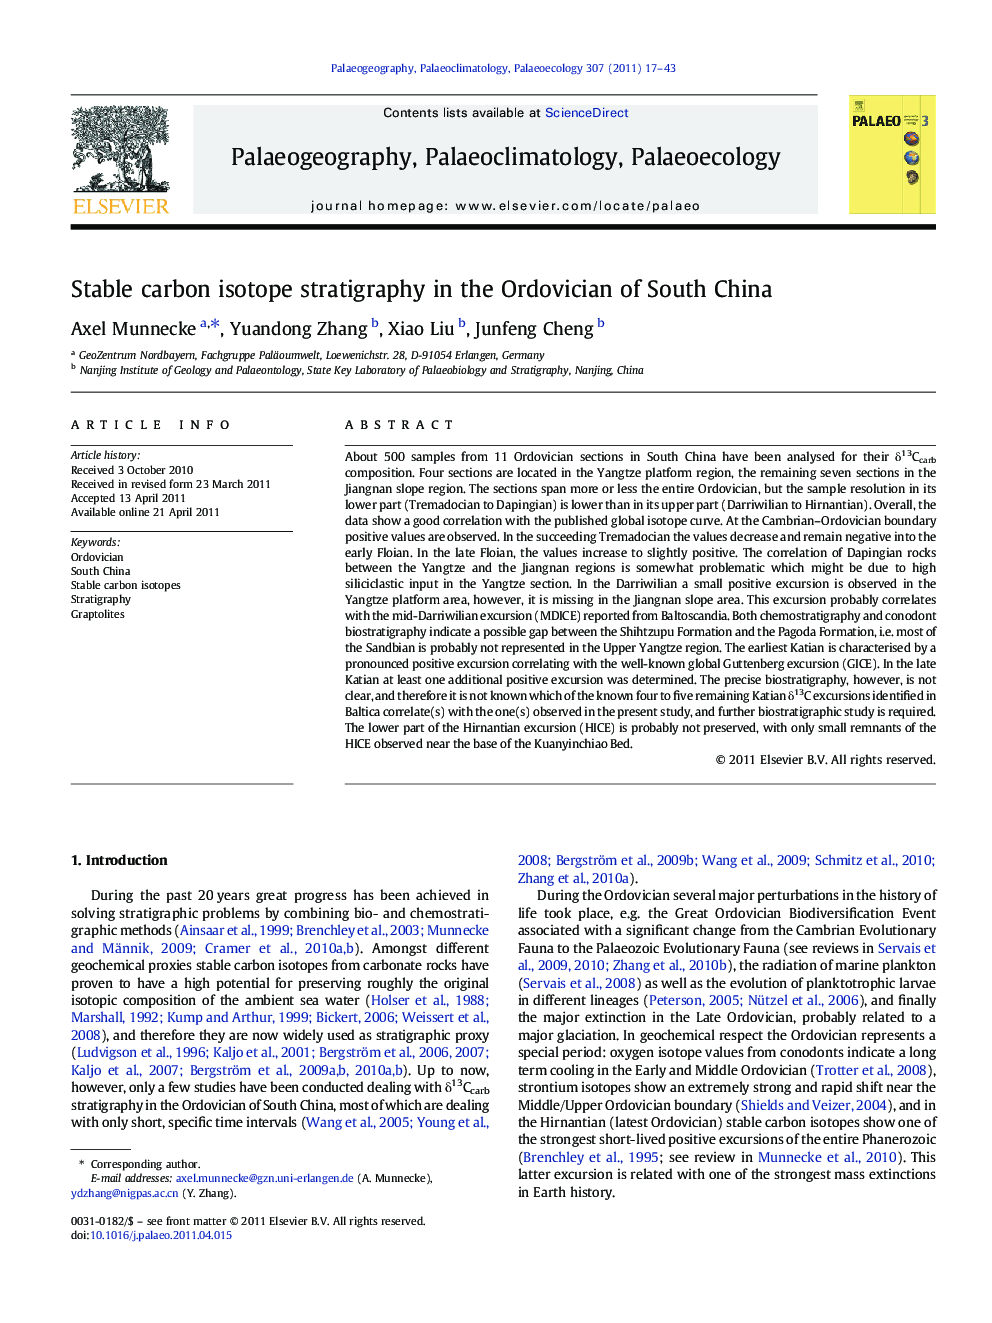 Stable carbon isotope stratigraphy in the Ordovician of South China